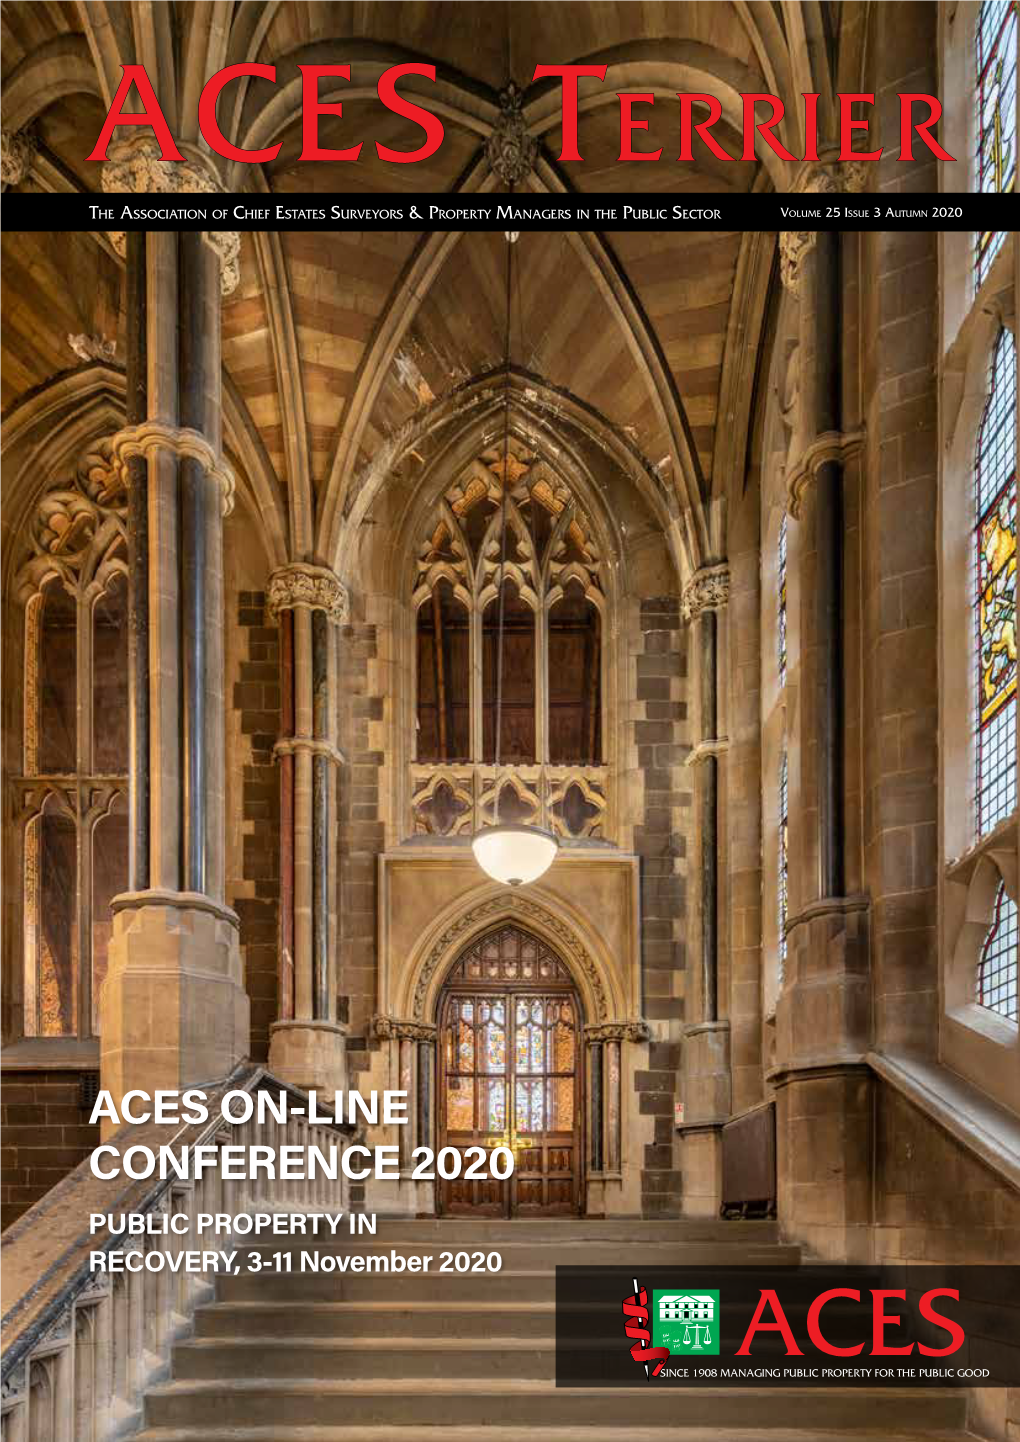 ACES ON-LINE CONFERENCE 2020 PUBLIC PROPERTY in RECOVERY, 3-11 November 2020